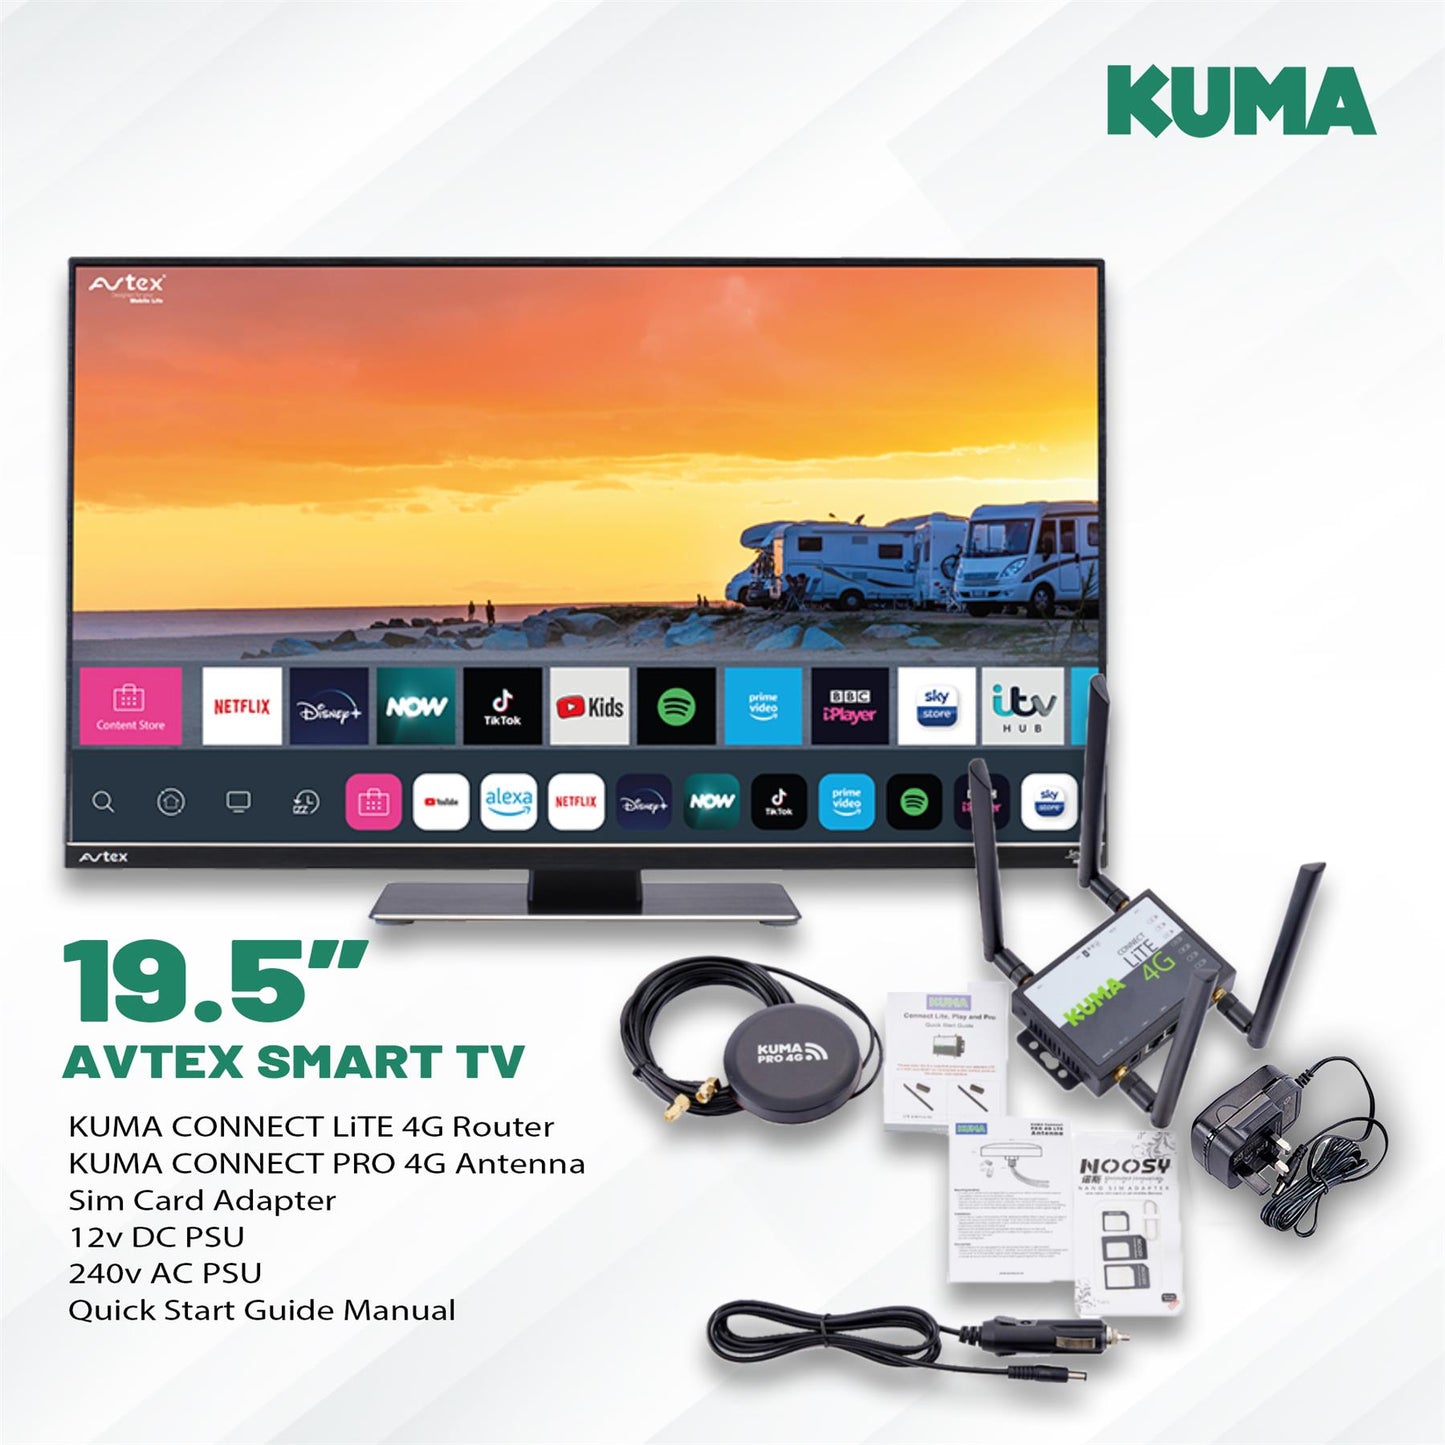 AVTEX W195TS 19.5" Smart TV & KUMA CONNECT PRO Kit - 12v 19.5 inch Super Slim LED Wifi Bluetooth Full HD Television & SIM Unlocked 4G Router & Outdoor Antenna Booster with Netflix Amazon Prime YouTube